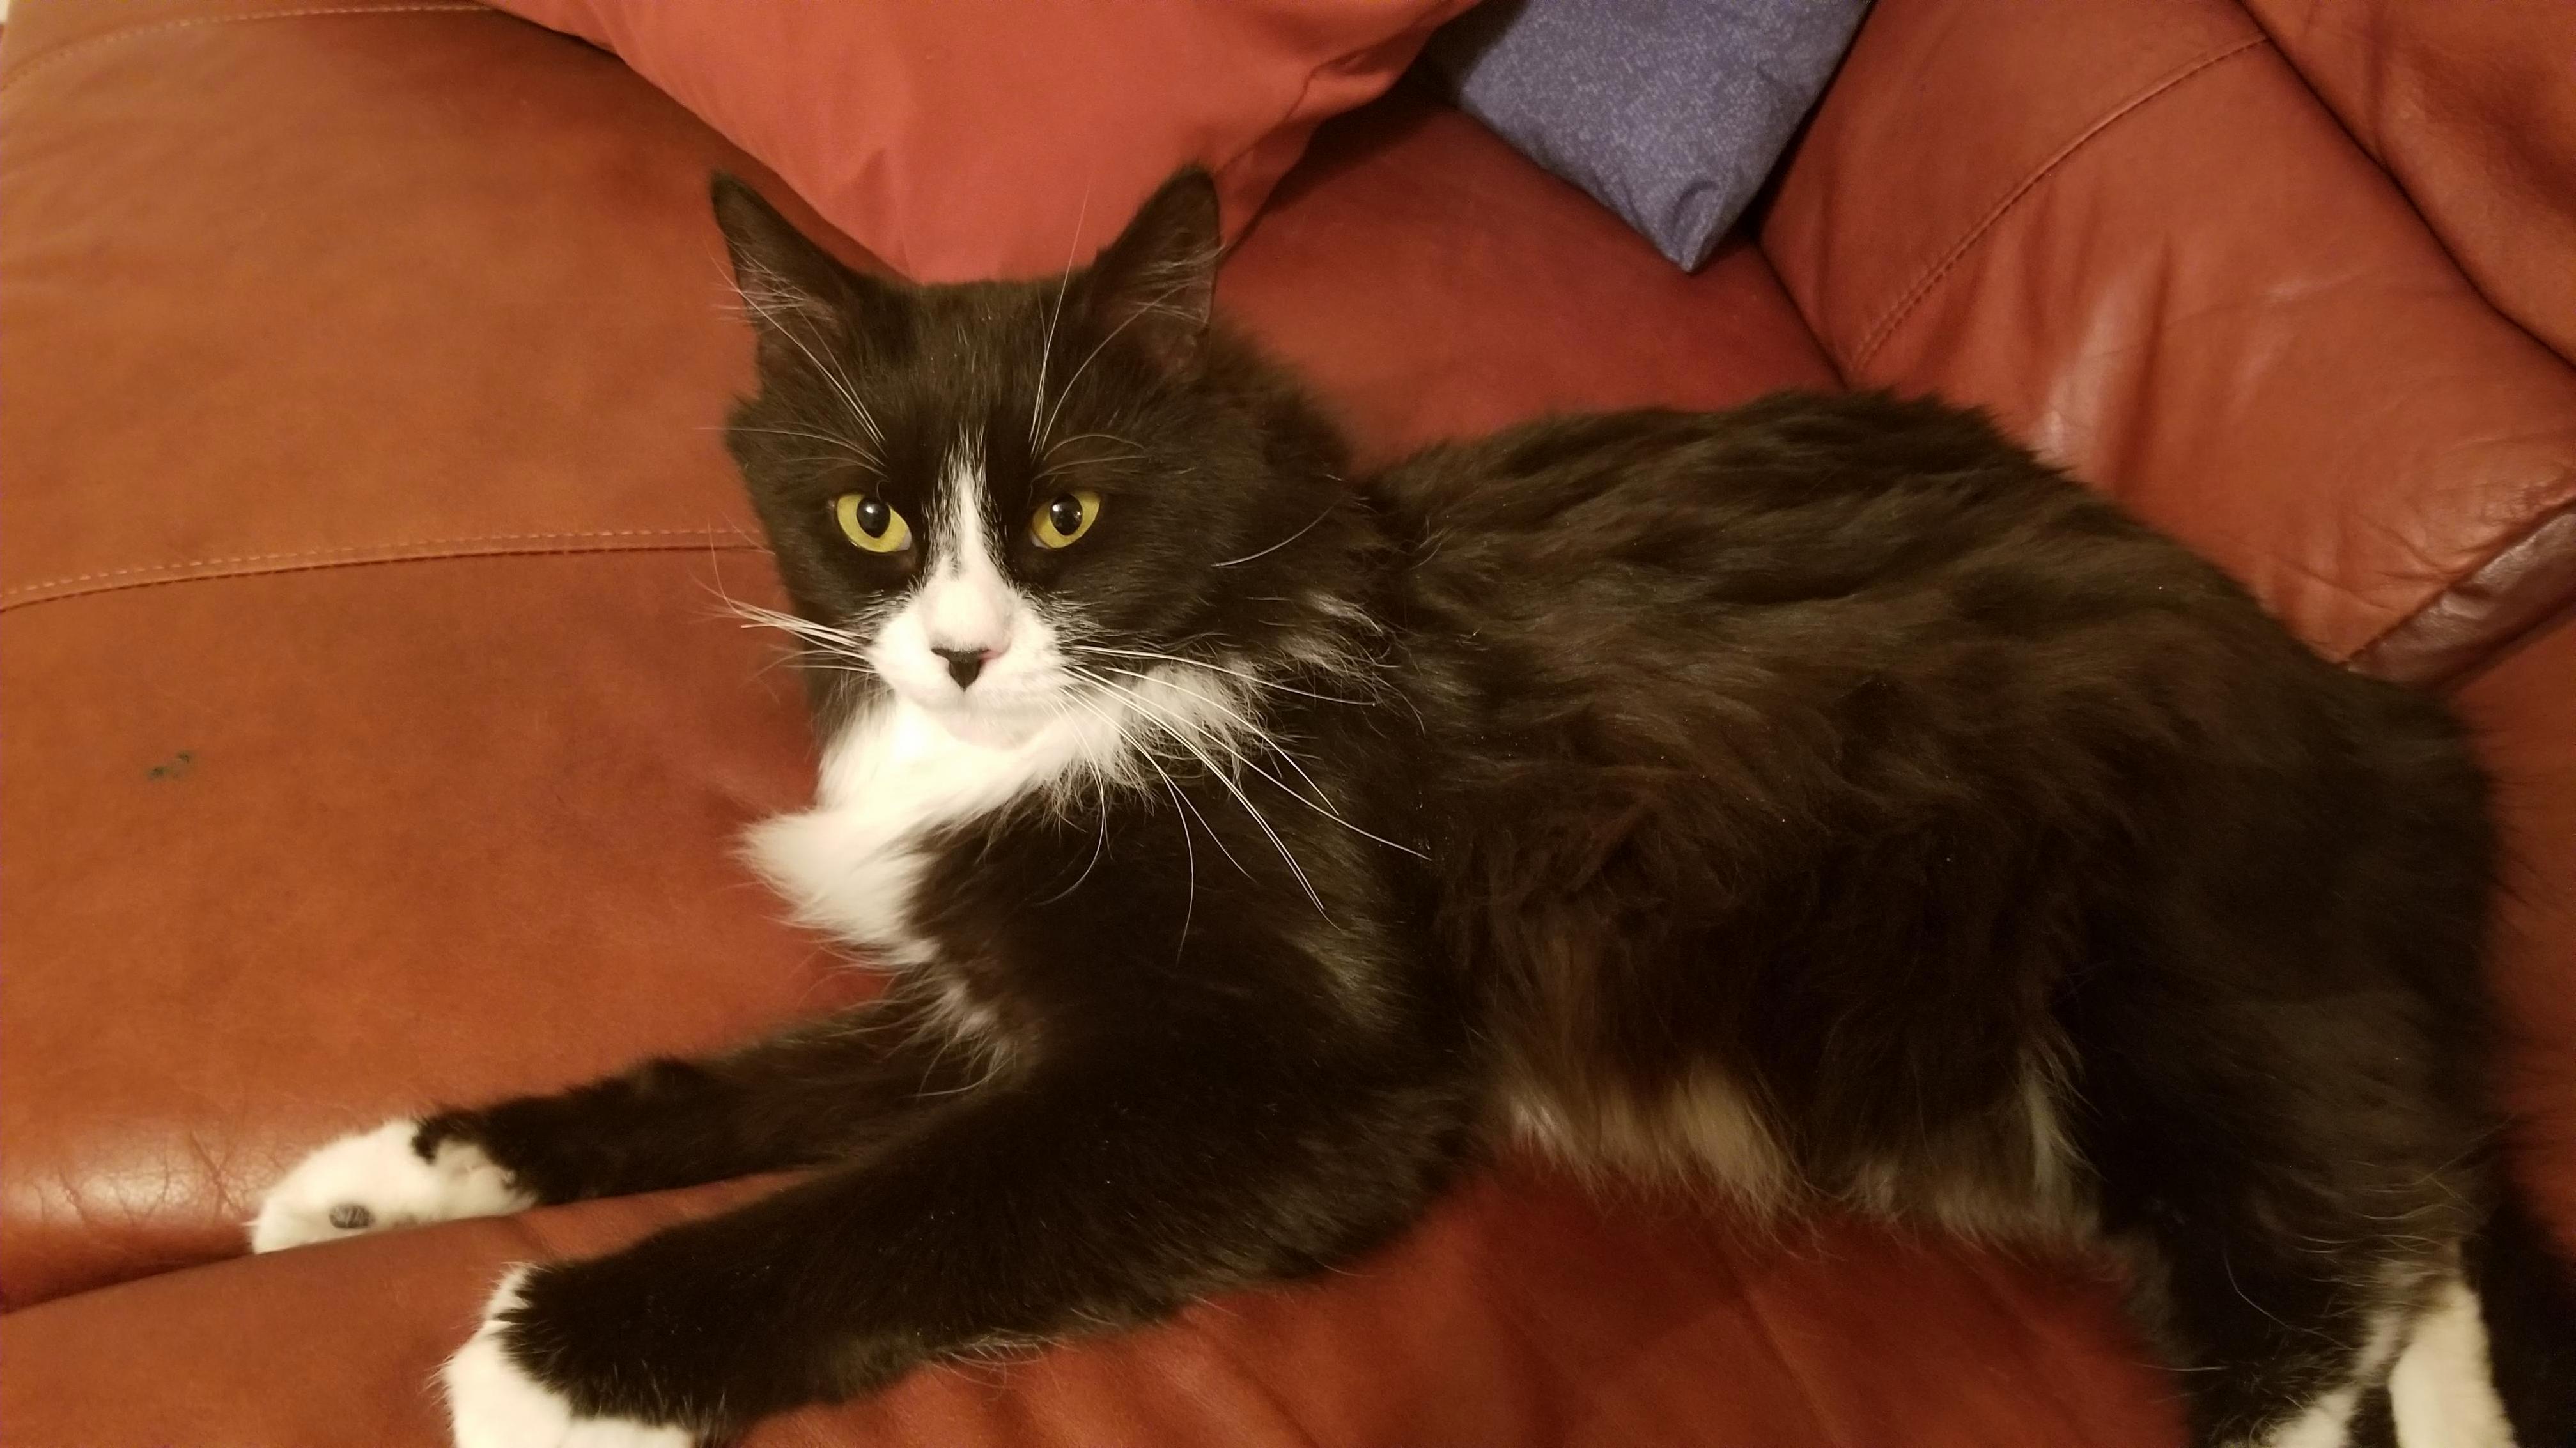 Adopted this fluffy guy today. his name is tux!